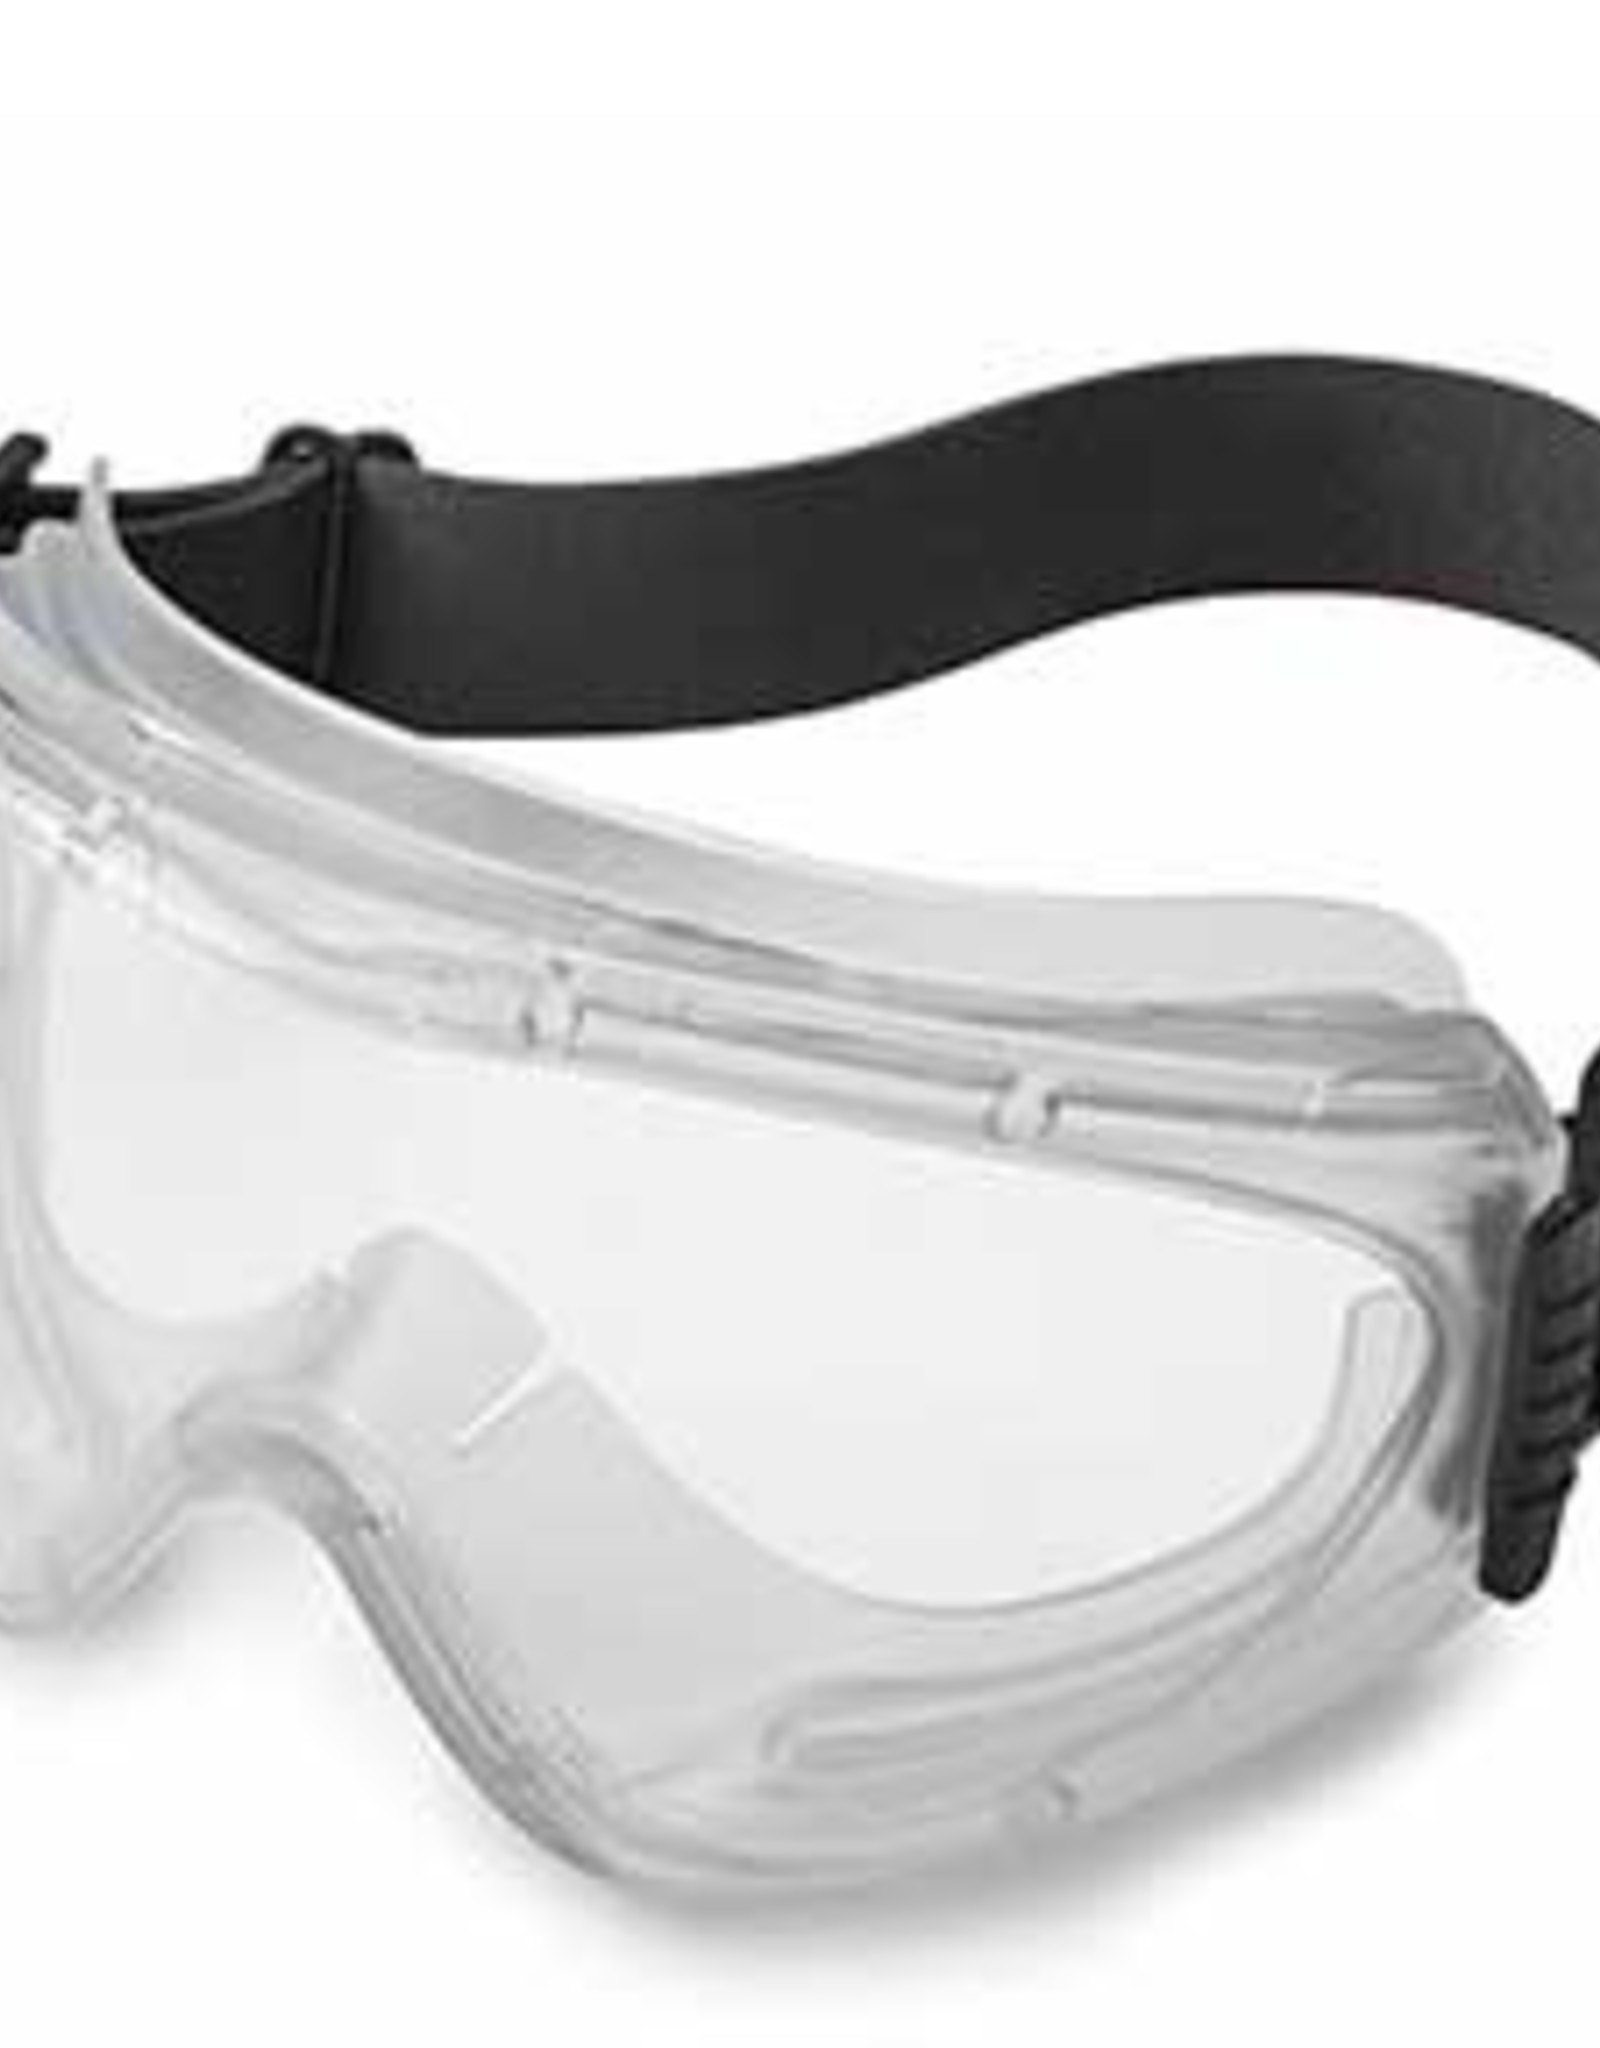 Radians Barricade Clear Anti Fog Safety Goggles Glasses Lightweight Z87 for sale online 